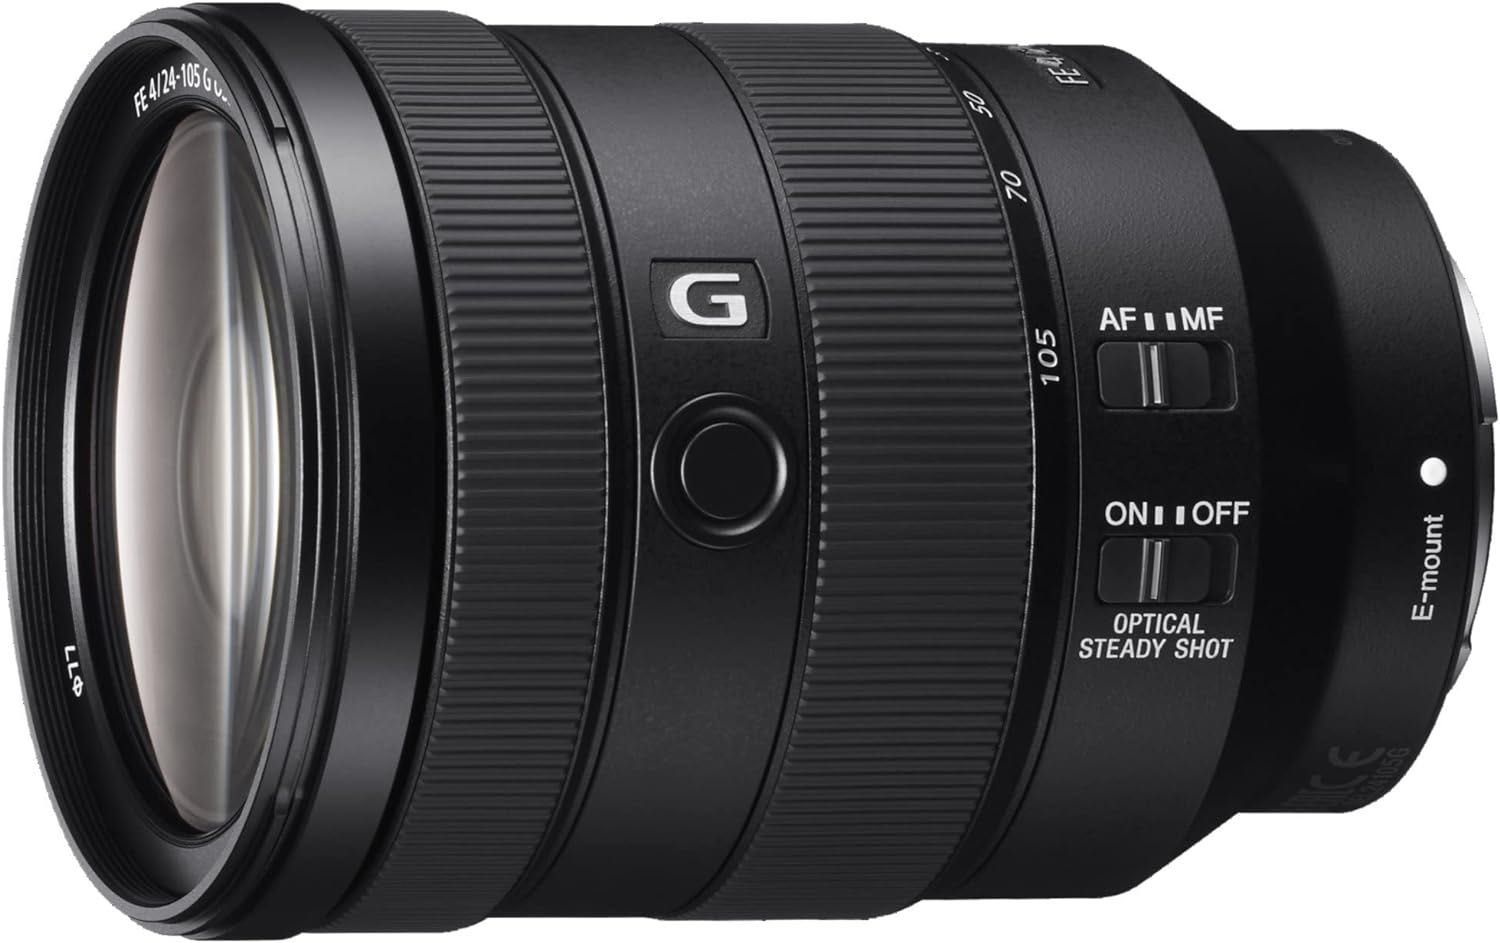 Sony SEL-24105G G Standard Zoom Lens - stare perfecta